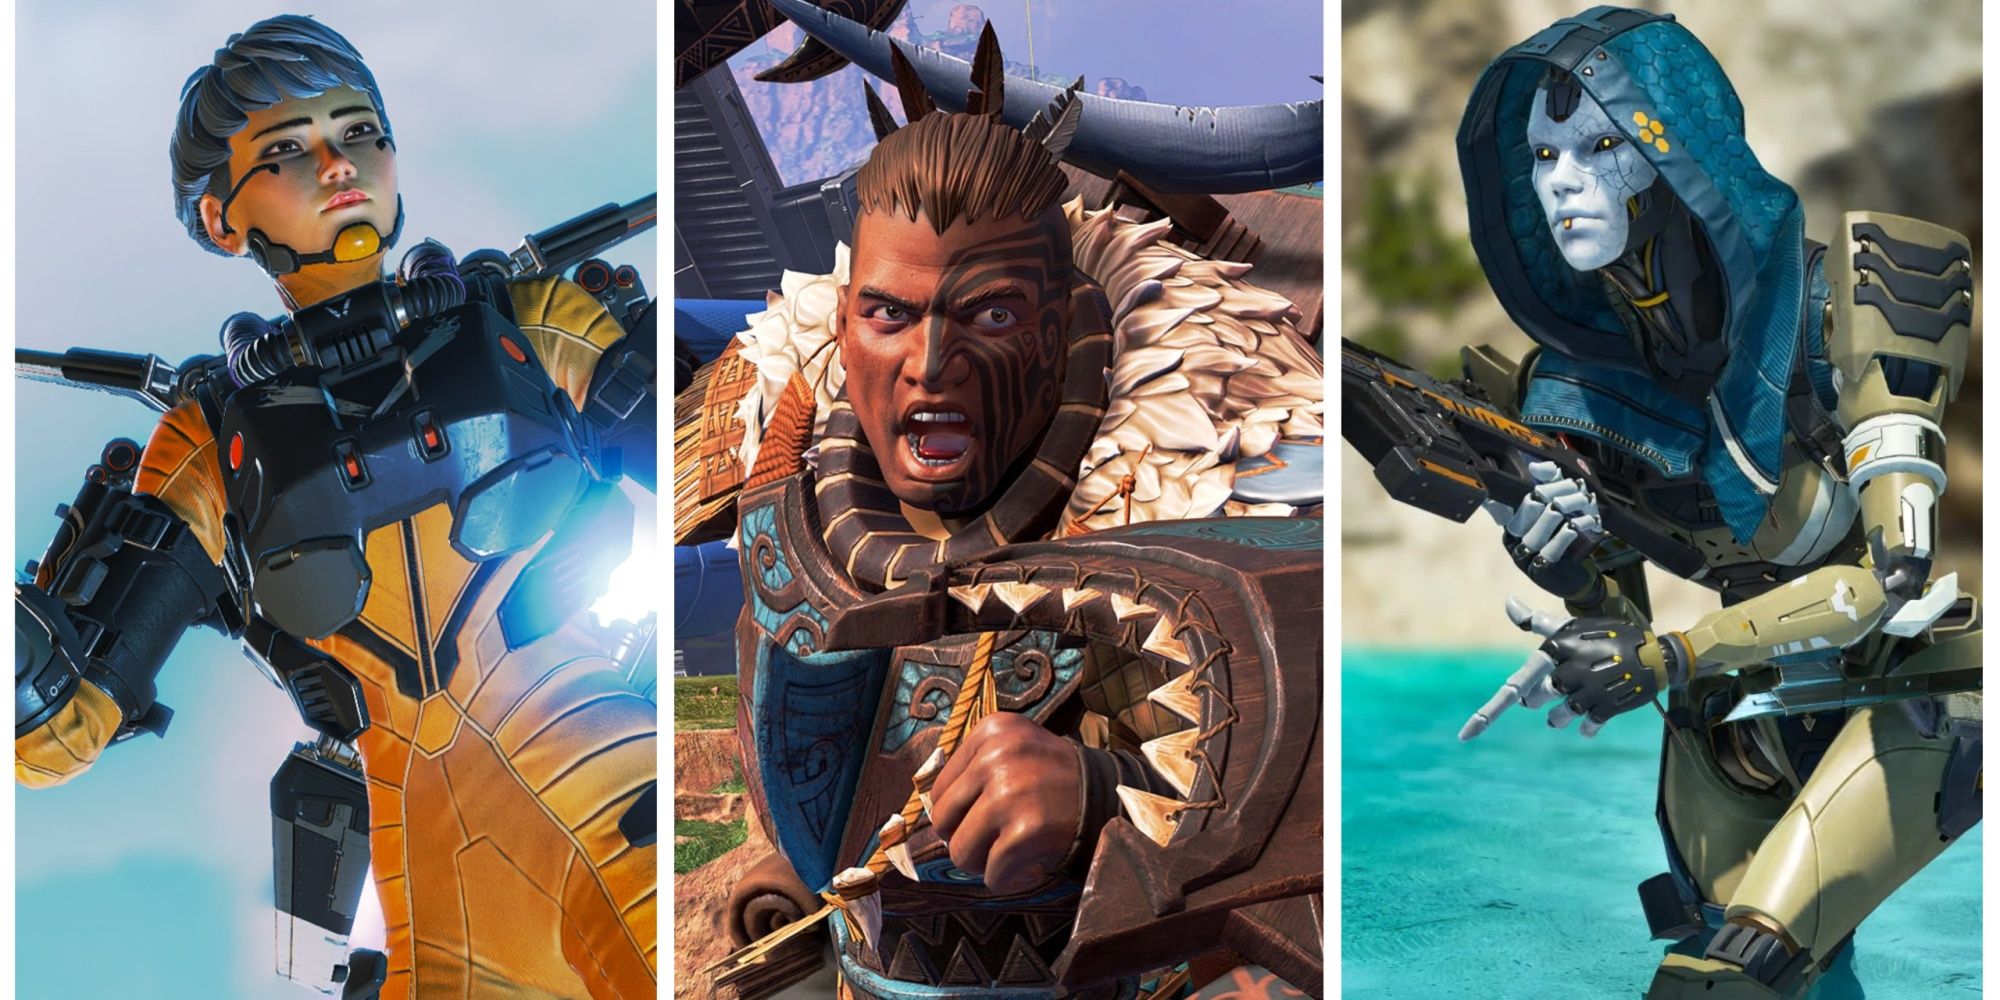 Collage of Valkyrie flying, Gibraltar Yelling, and Ash Reloading gun in Apex Legends